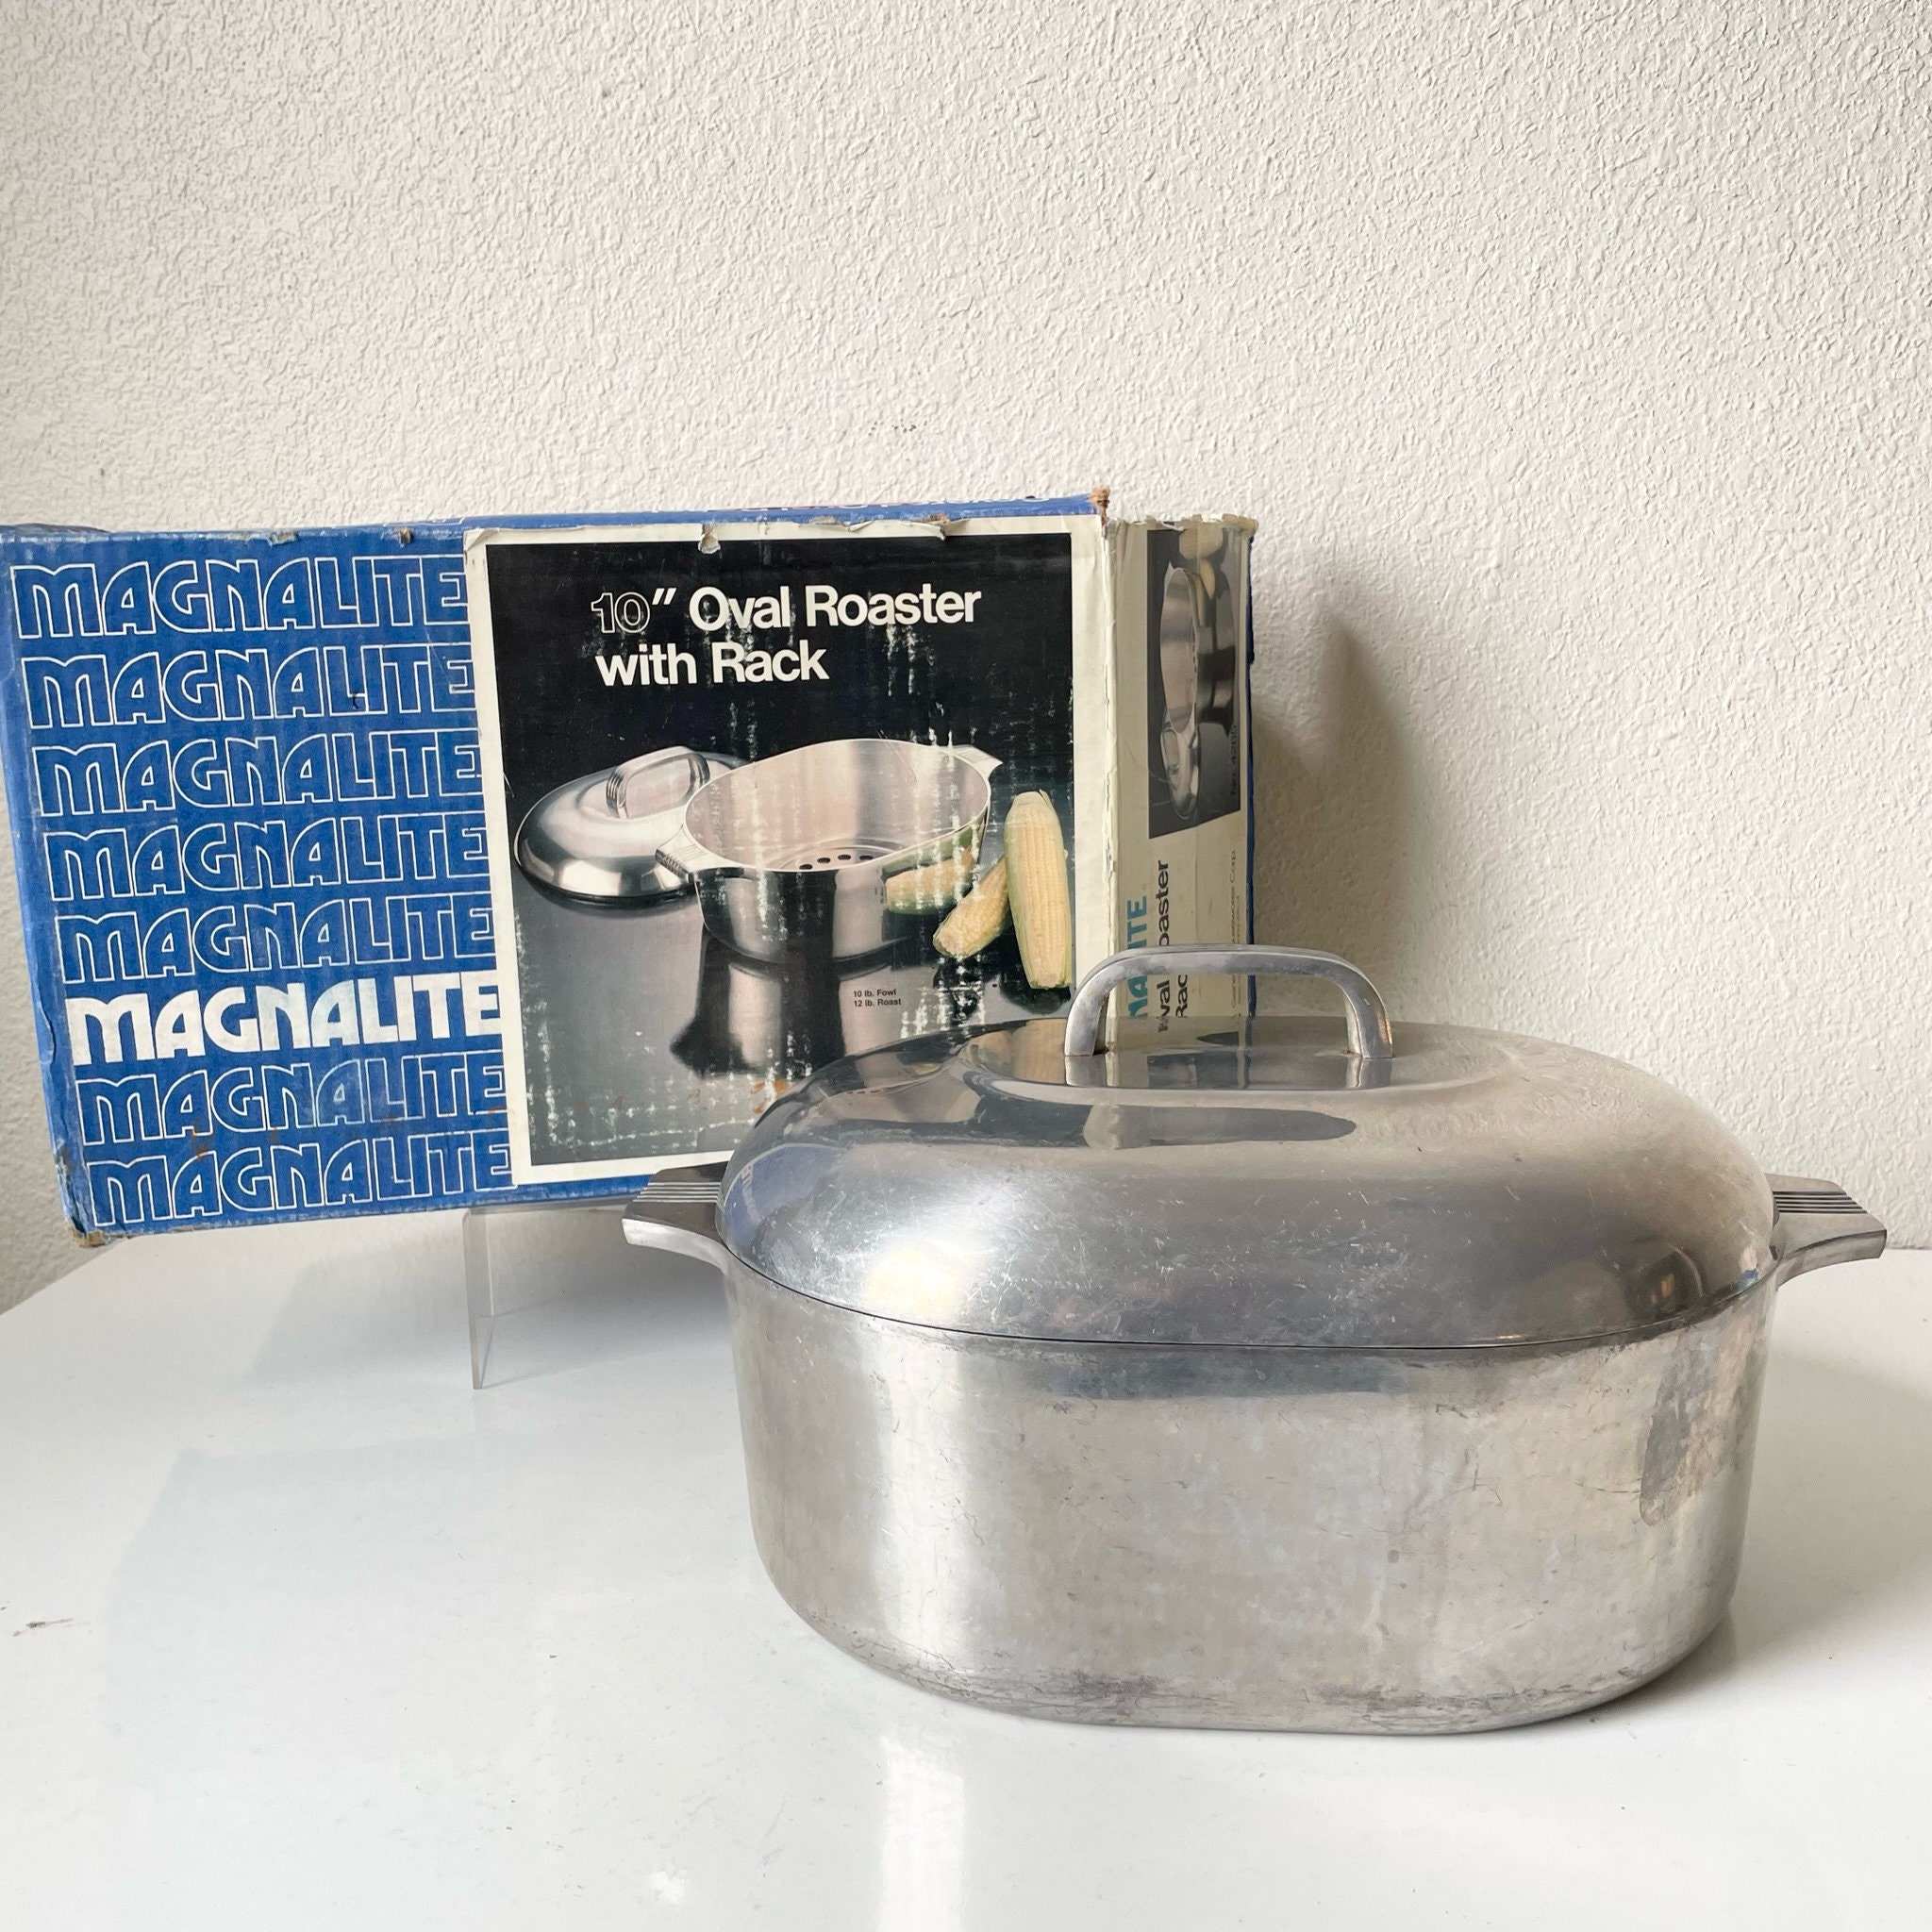 GHC Wagner Ware 8 QT Magnalite 10 Oval Roaster Pot with Box 4265, Sidney  Aluminum Roaster Large Roasting Pan Dutch Oven Vintage Cookware